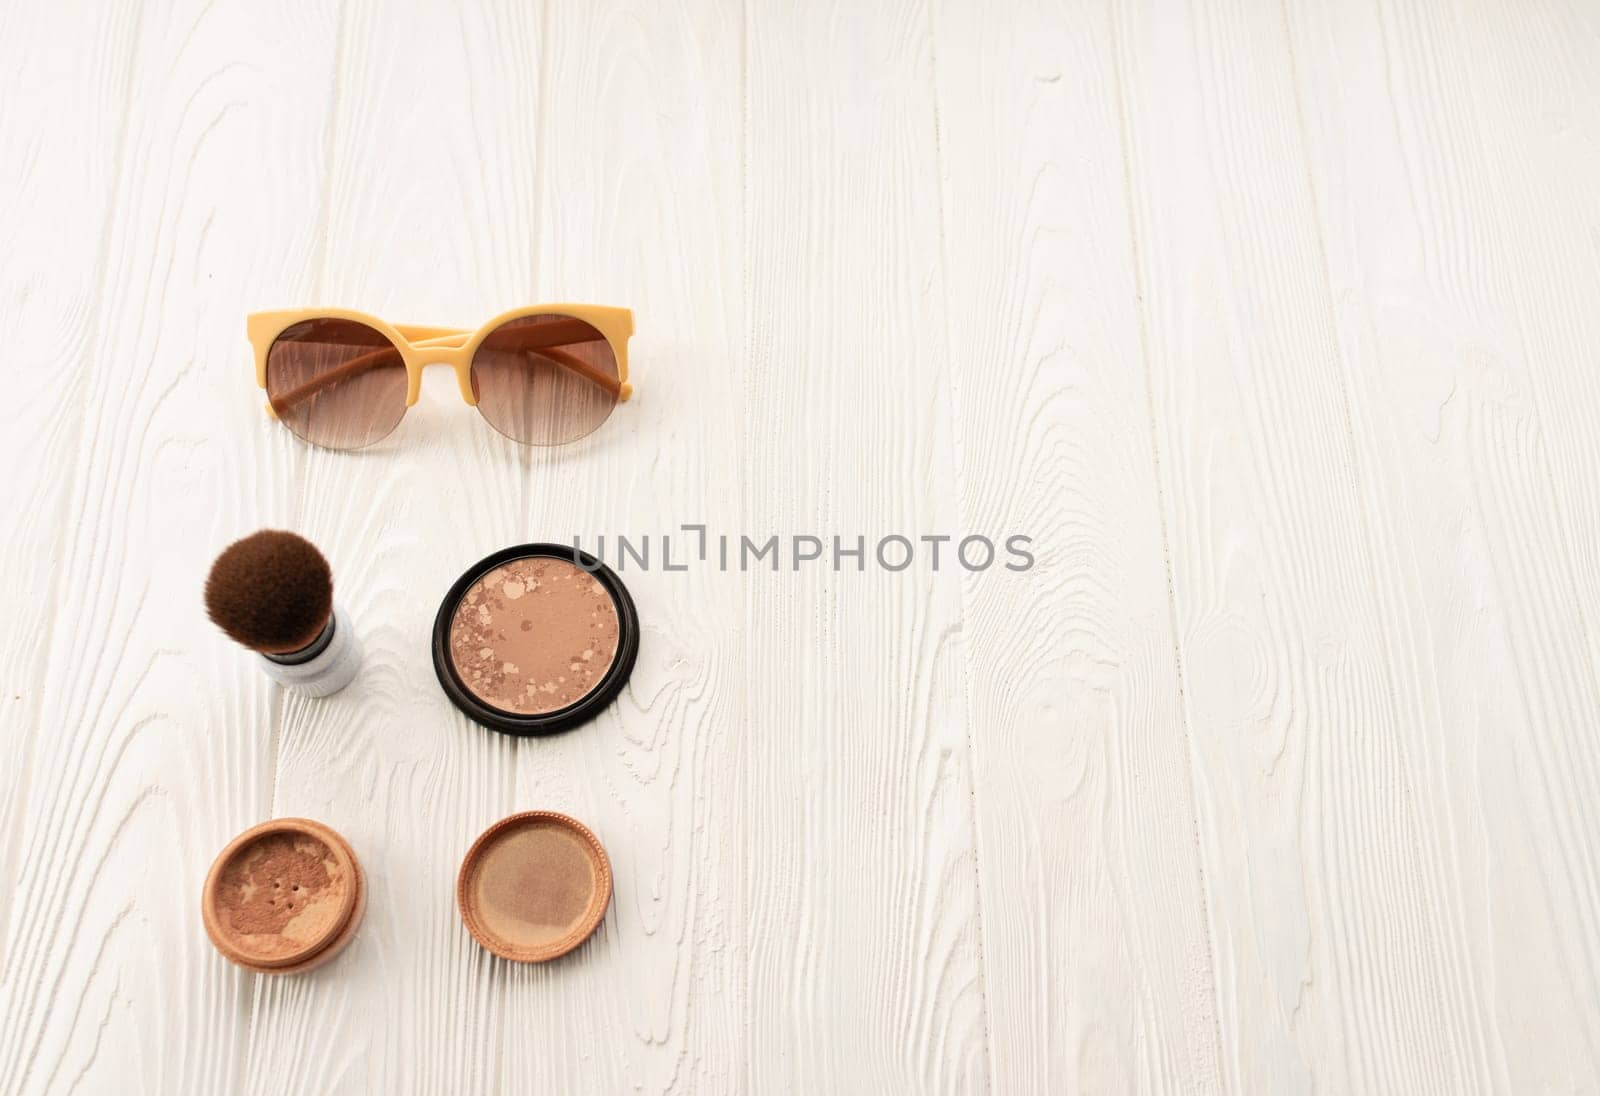 Top sunglasses beige makeup brush powder decorative cosmetic. Summer background mockup template text. top view above white wooden background Summer fashion accessories. Women summer Vacation concept